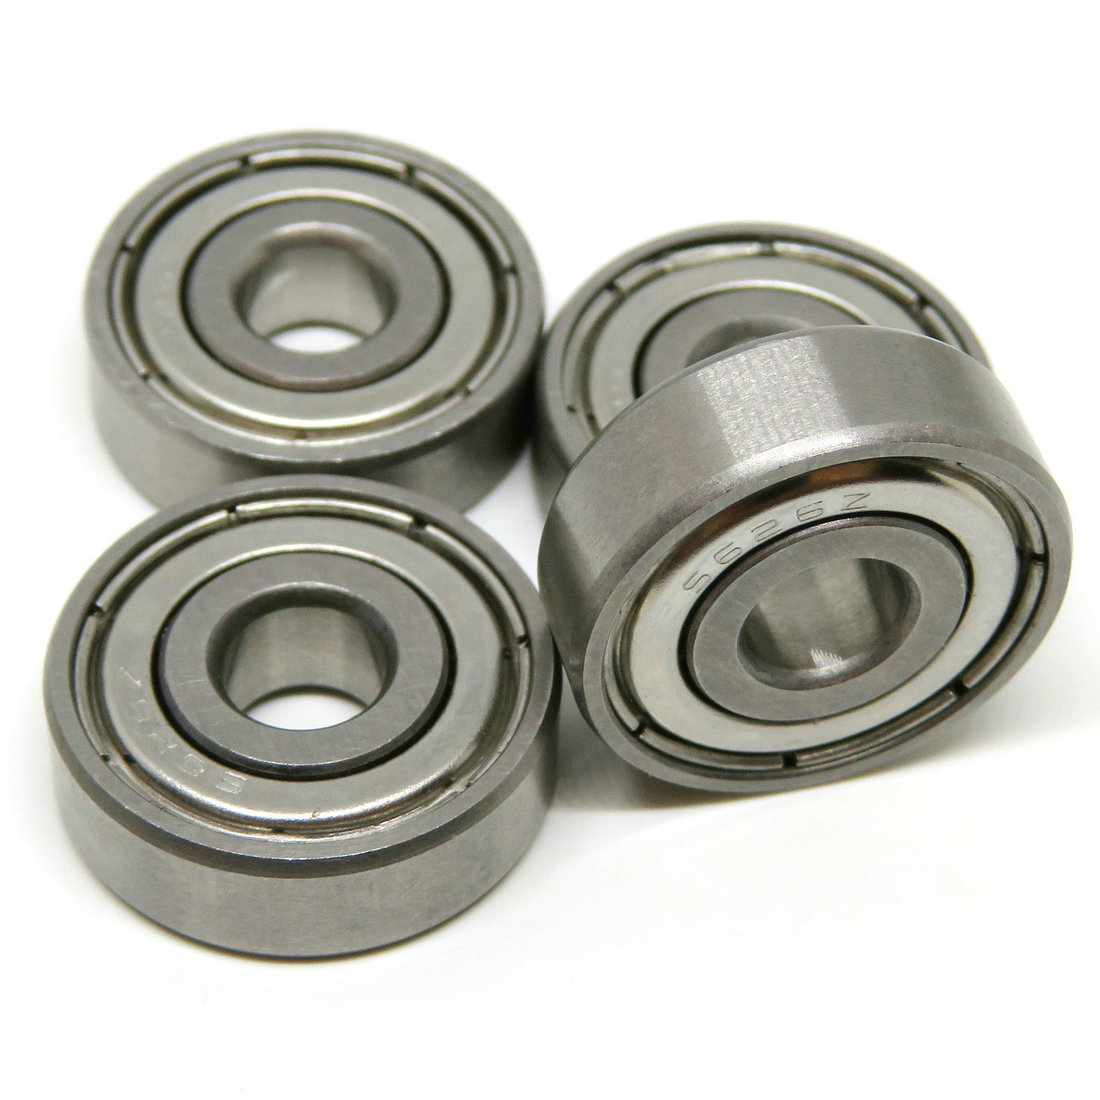 Toy Cars S625ZZ S625 2RS Stainless Steel deep Groove Ball Bearing 5x16x5mm Miniature Bearing.jpg